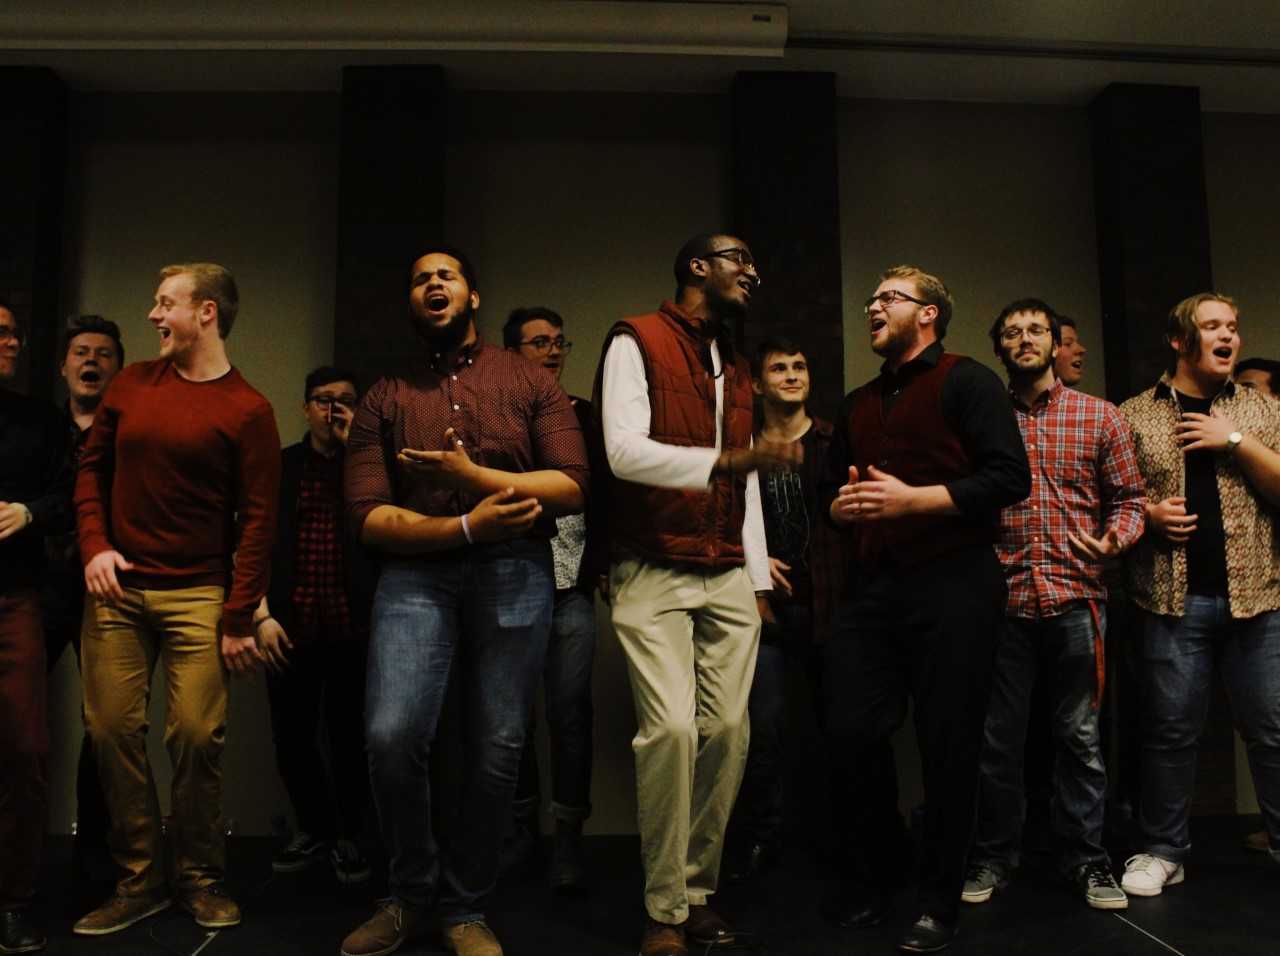 The Acafellaz performing in the Prairie Room in the Bone Student Center.